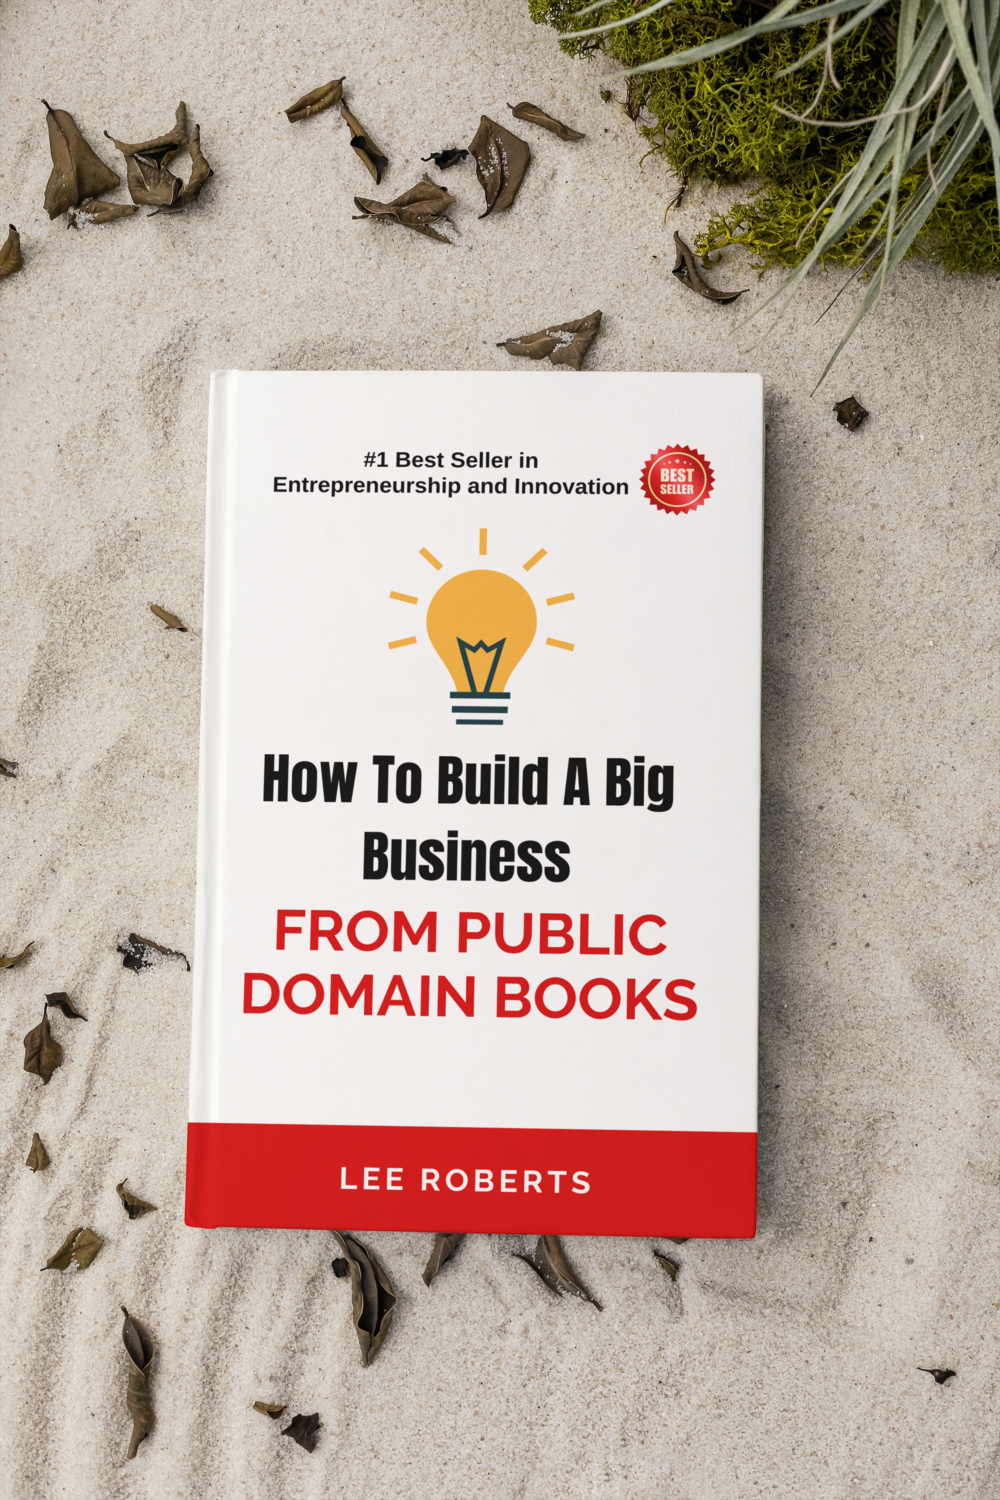 Ebook: How to Build a Big Business From Public Domain Books by Lee Roberts